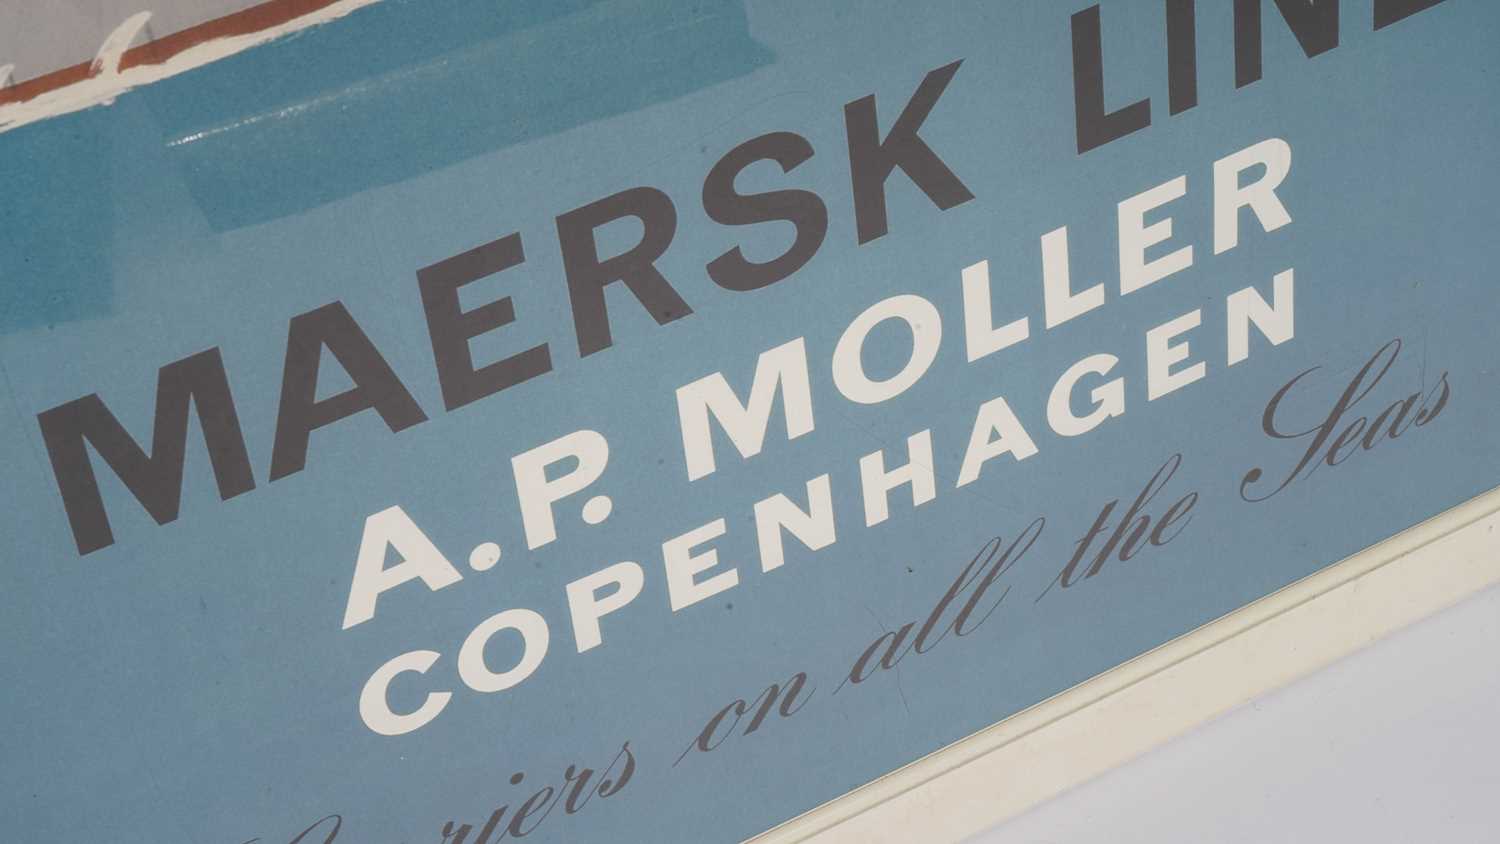 After Aage Rasmussen - Maersk Line and Odense advertising posters | offset lithographic prints - Image 4 of 10